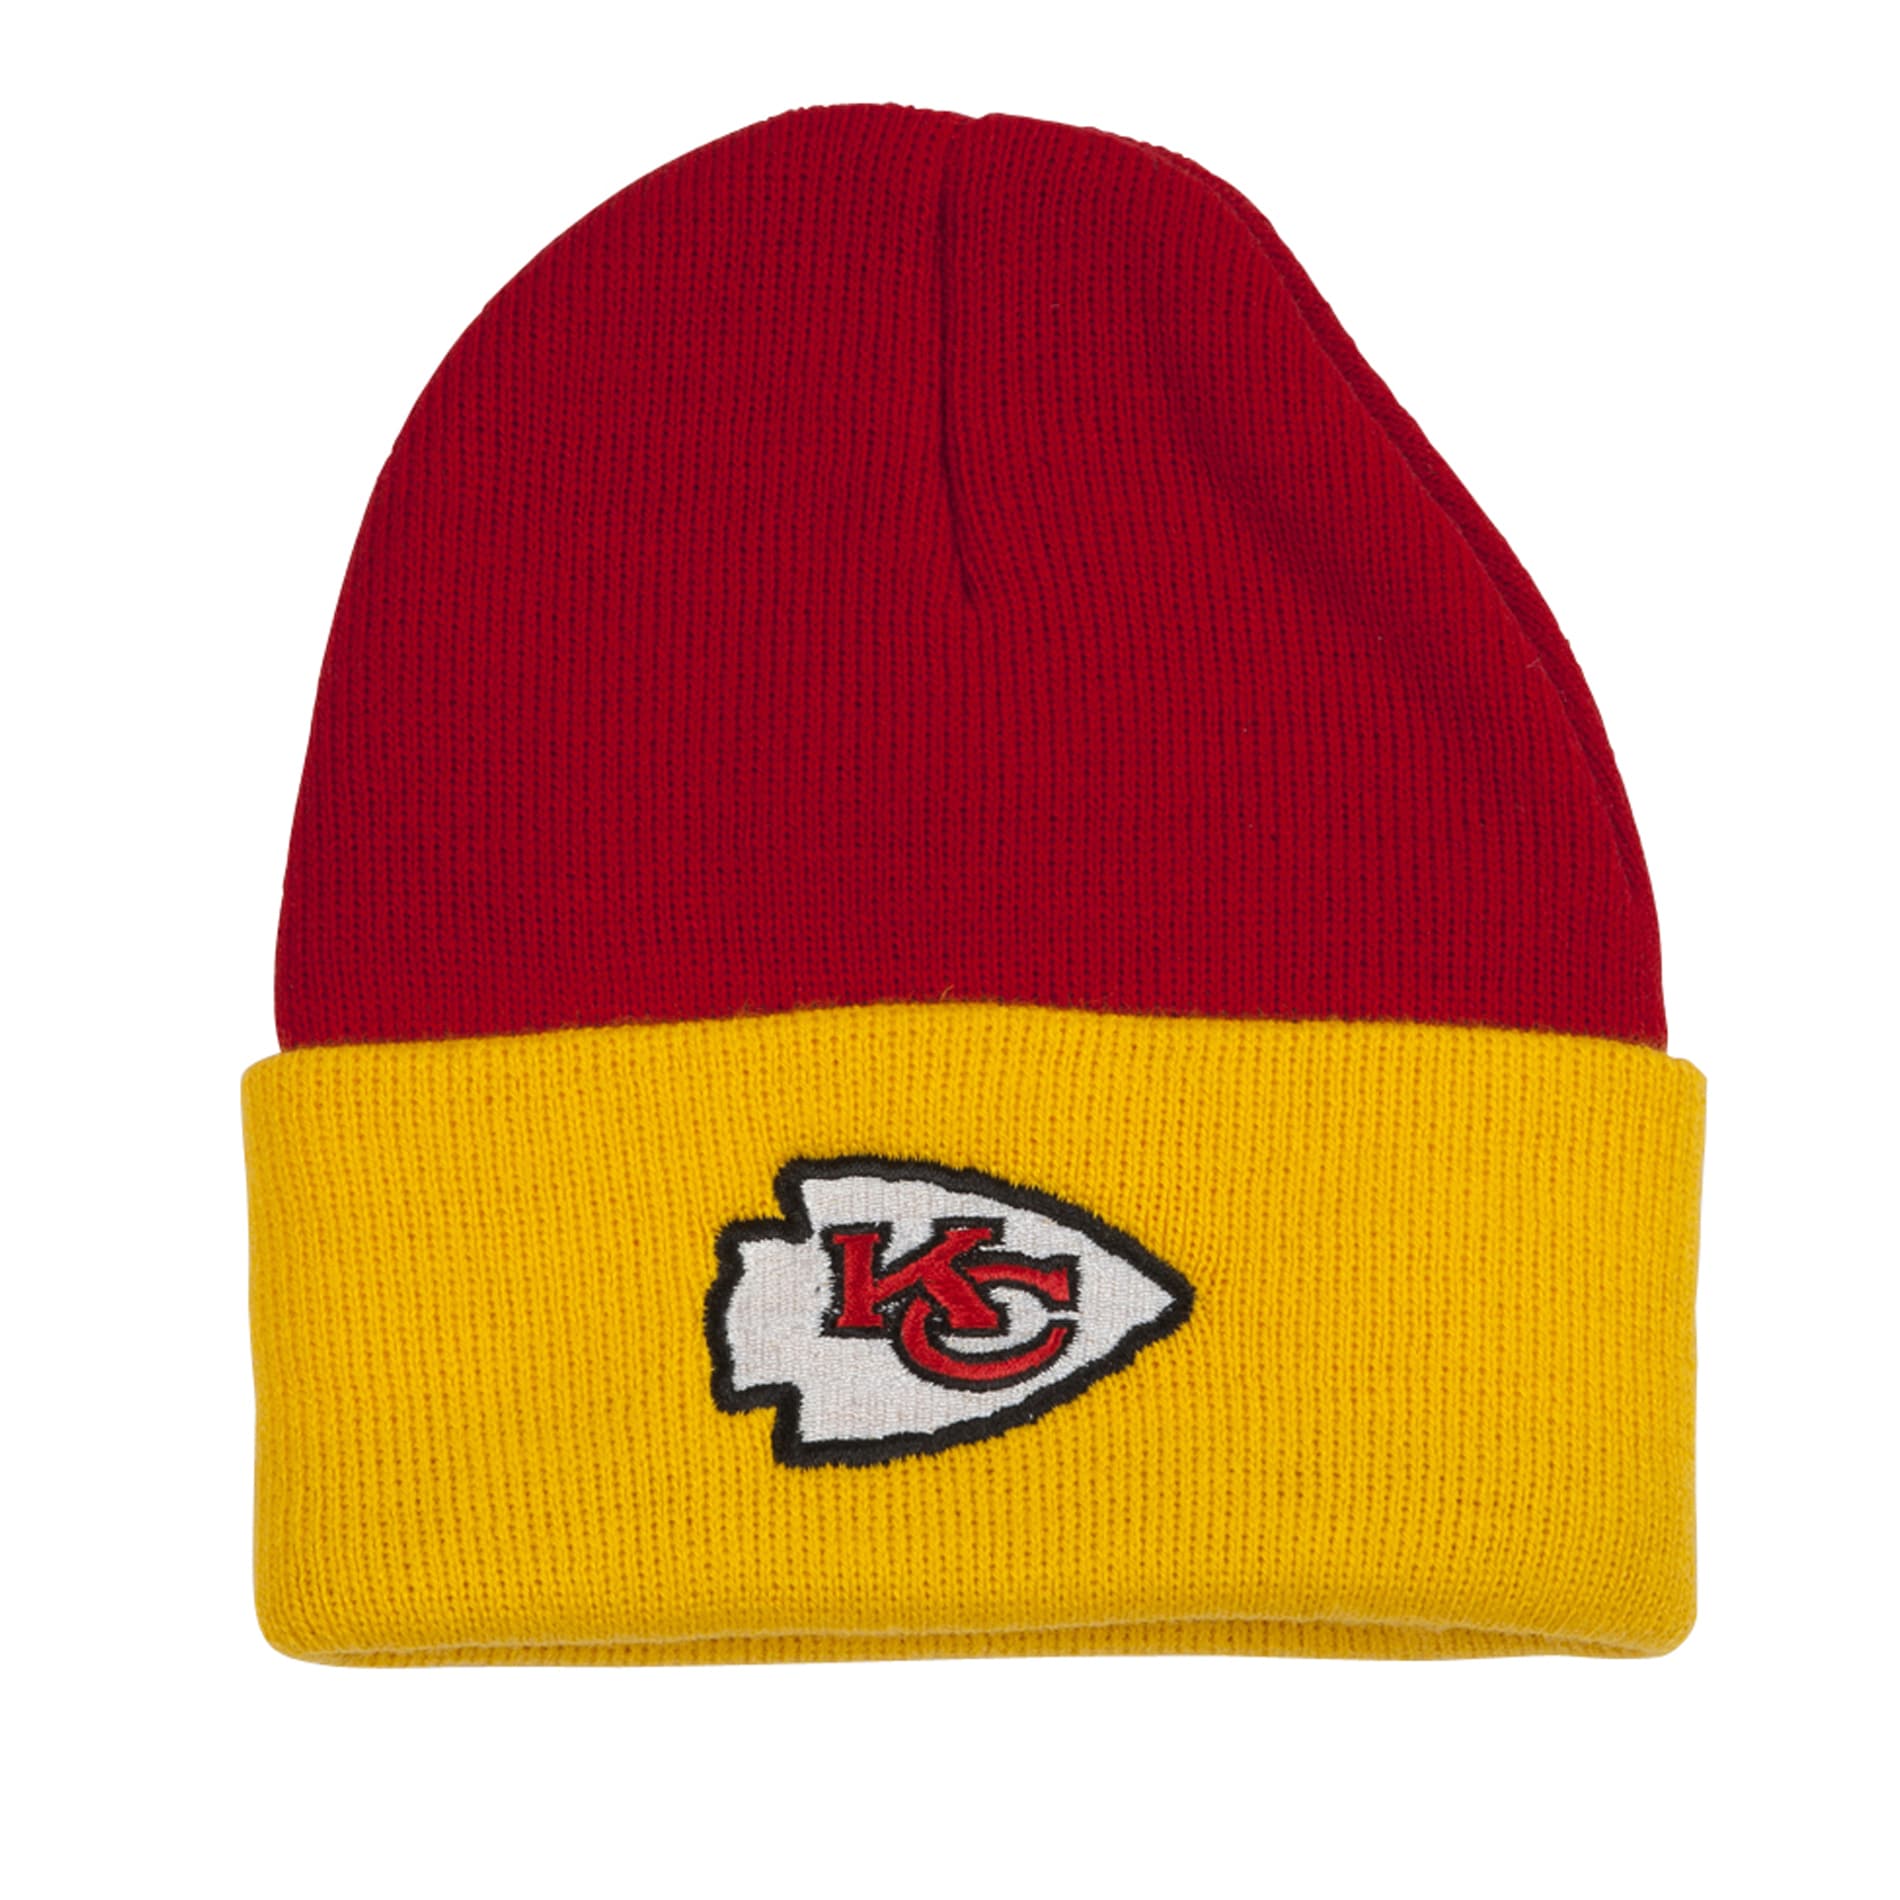 Kansas City Chiefs Logo Stocking Hat - Free Shipping On Orders Over $45 - Overstock ...1900 x 1900